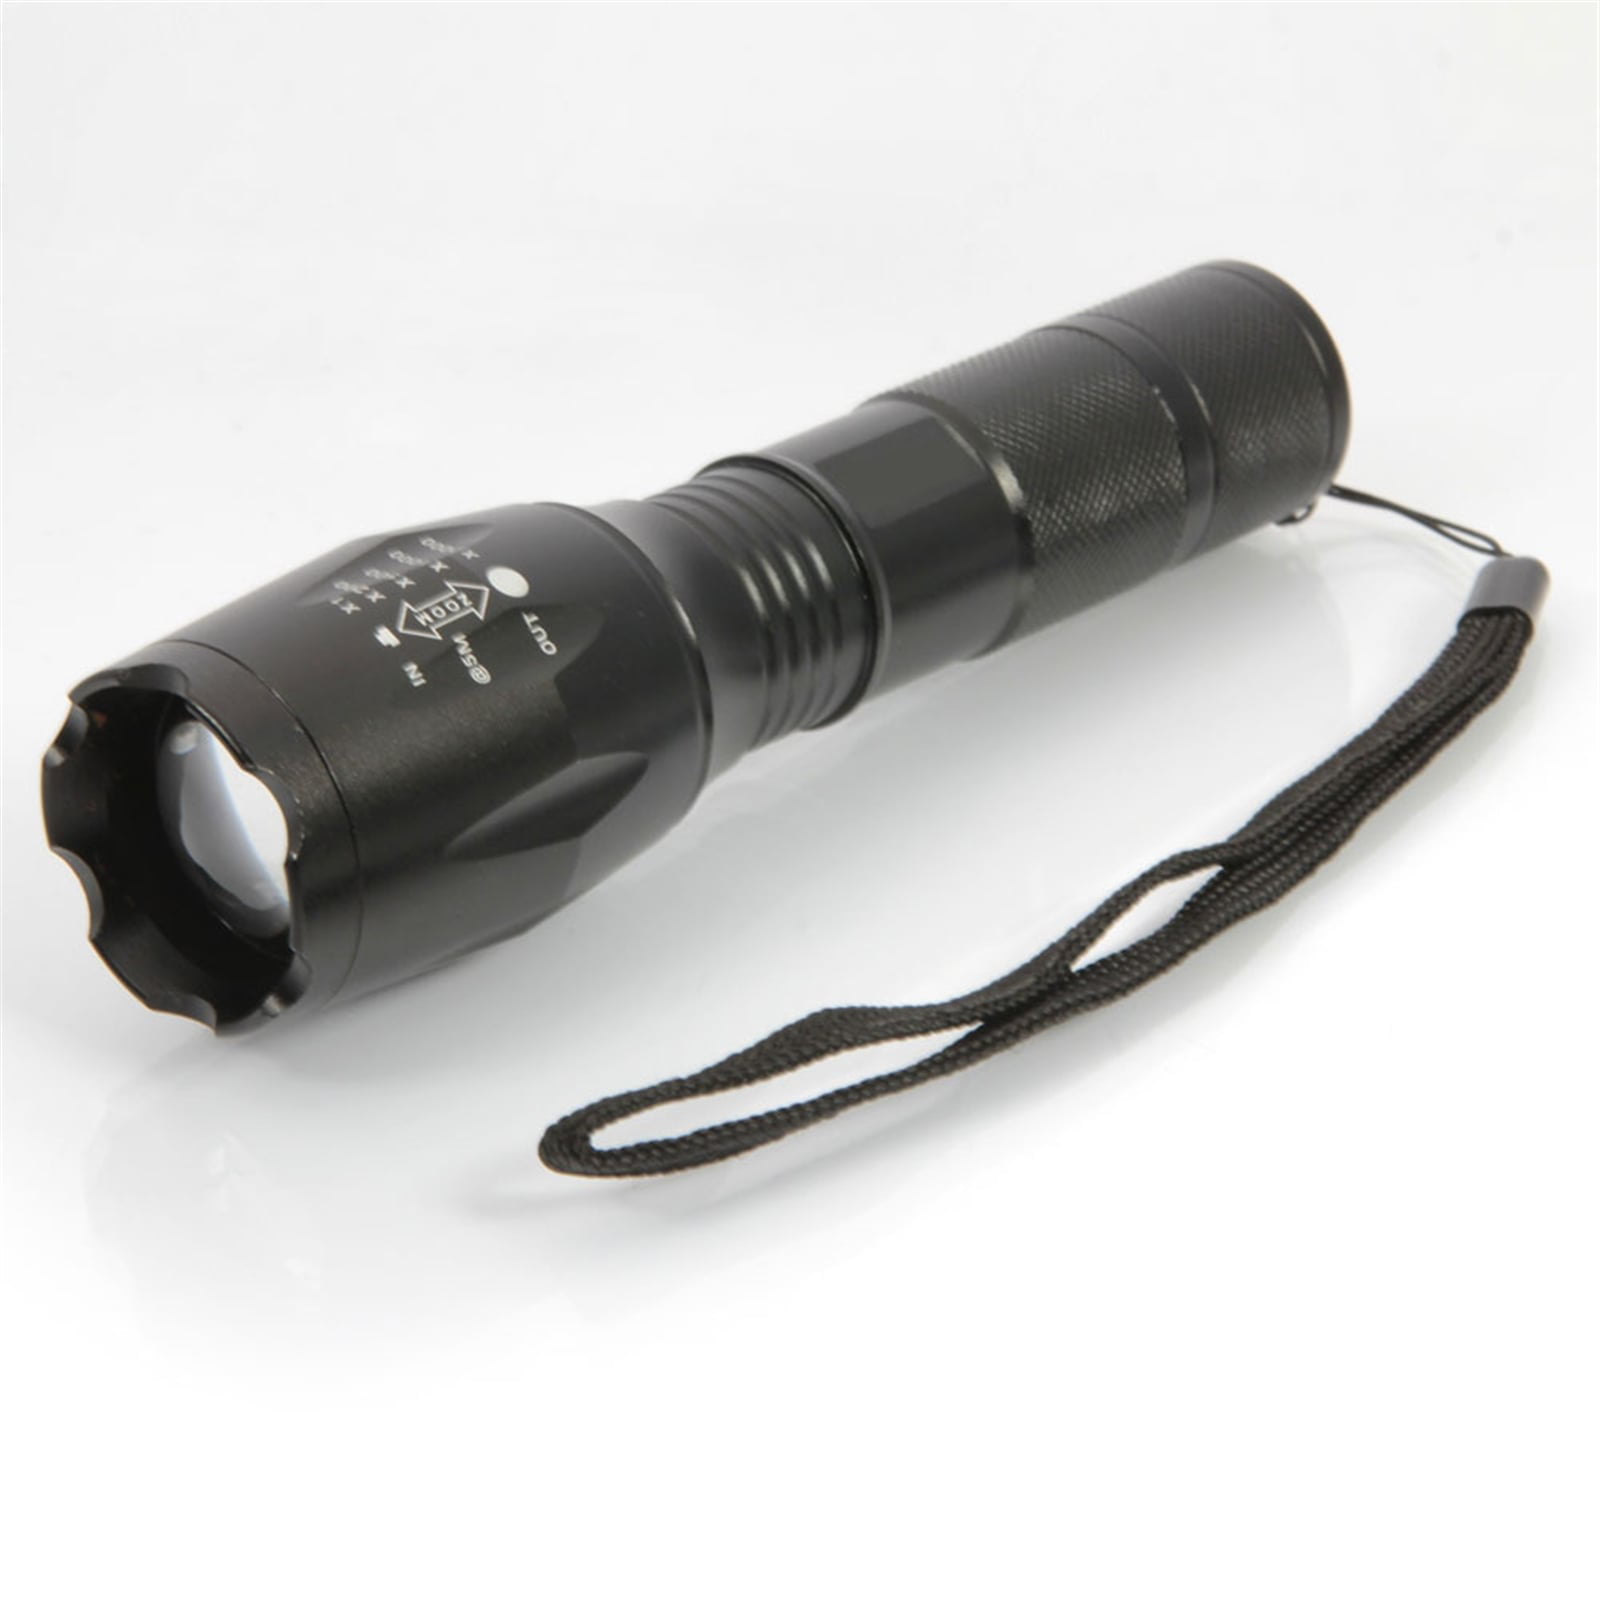 10000LM LED Tactical Flashlight 3Modes Zoomable Focus Torch Lamp Bright Light US 